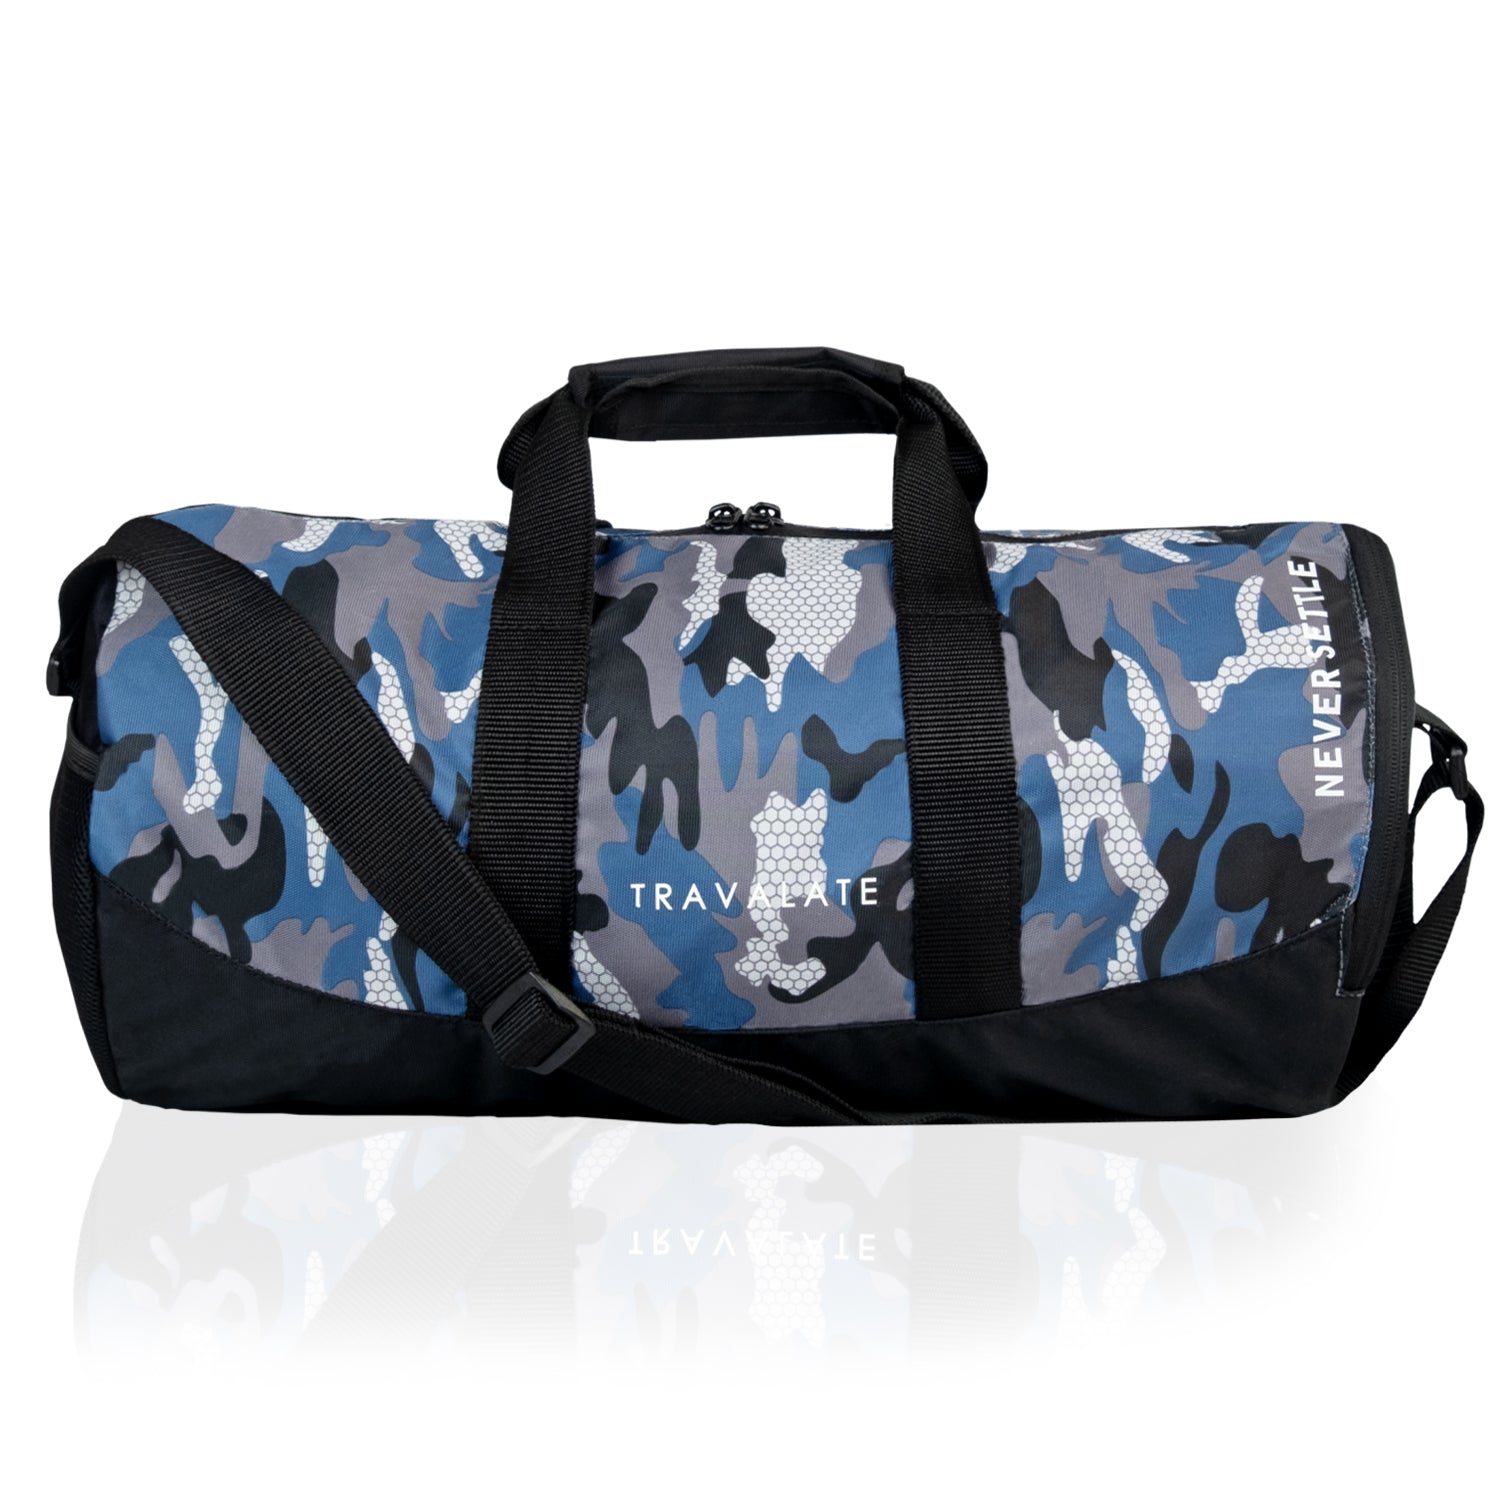 Military Grade Gym Bag with Shoe Compartment